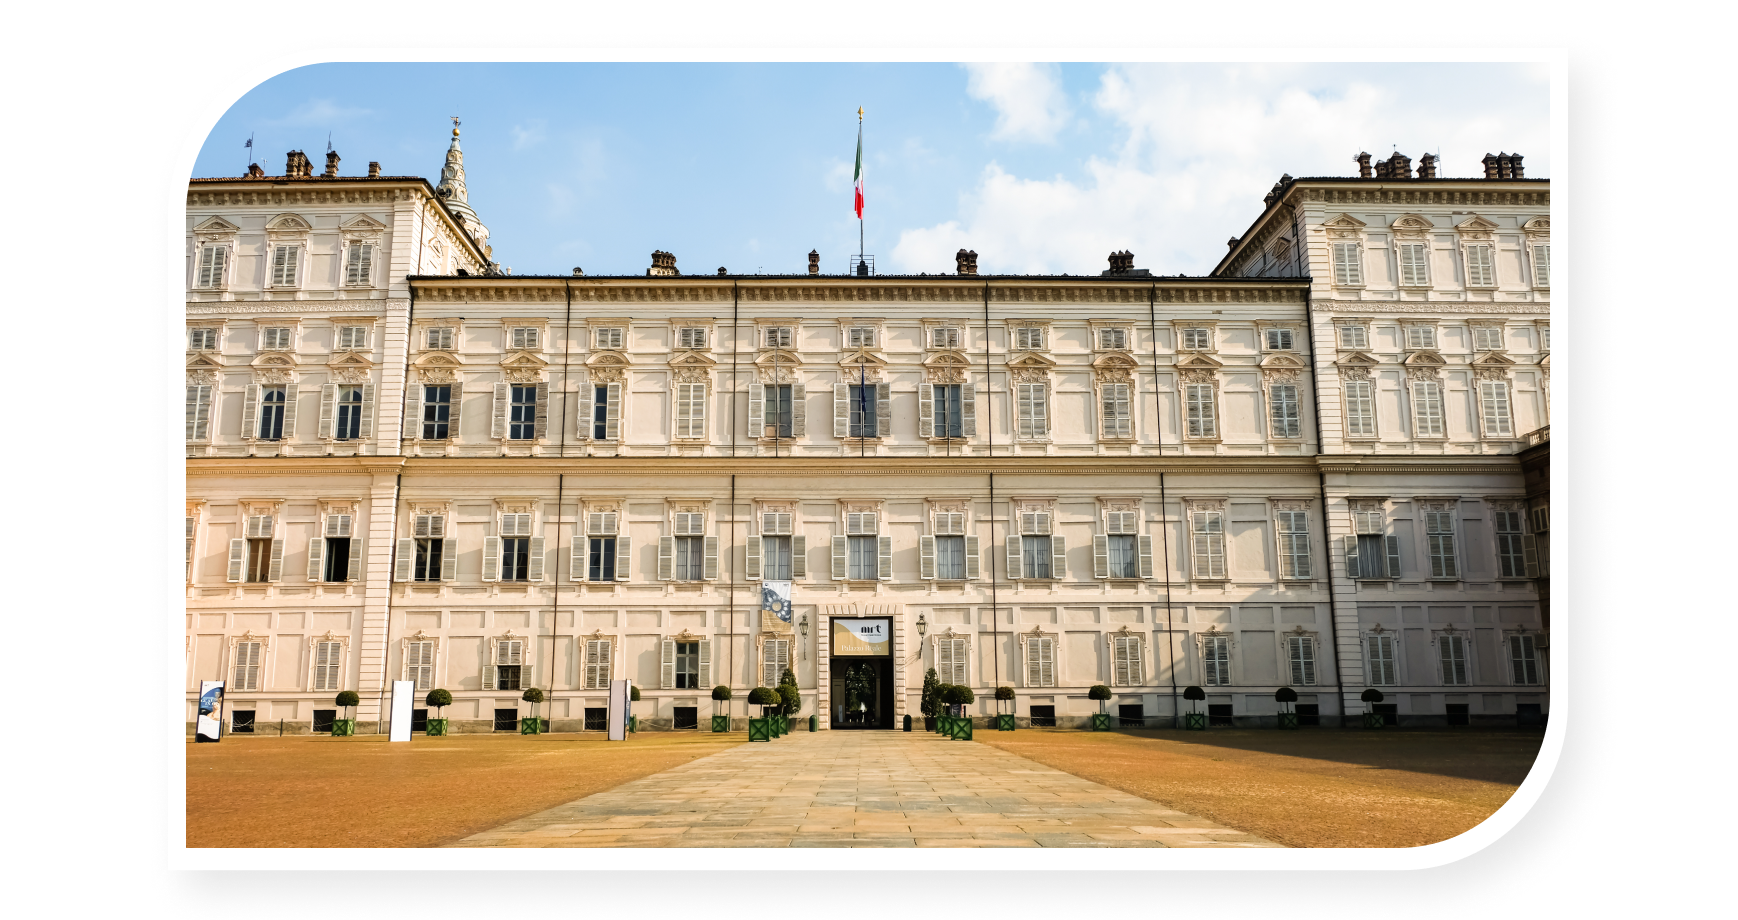 Royal palace in Turin